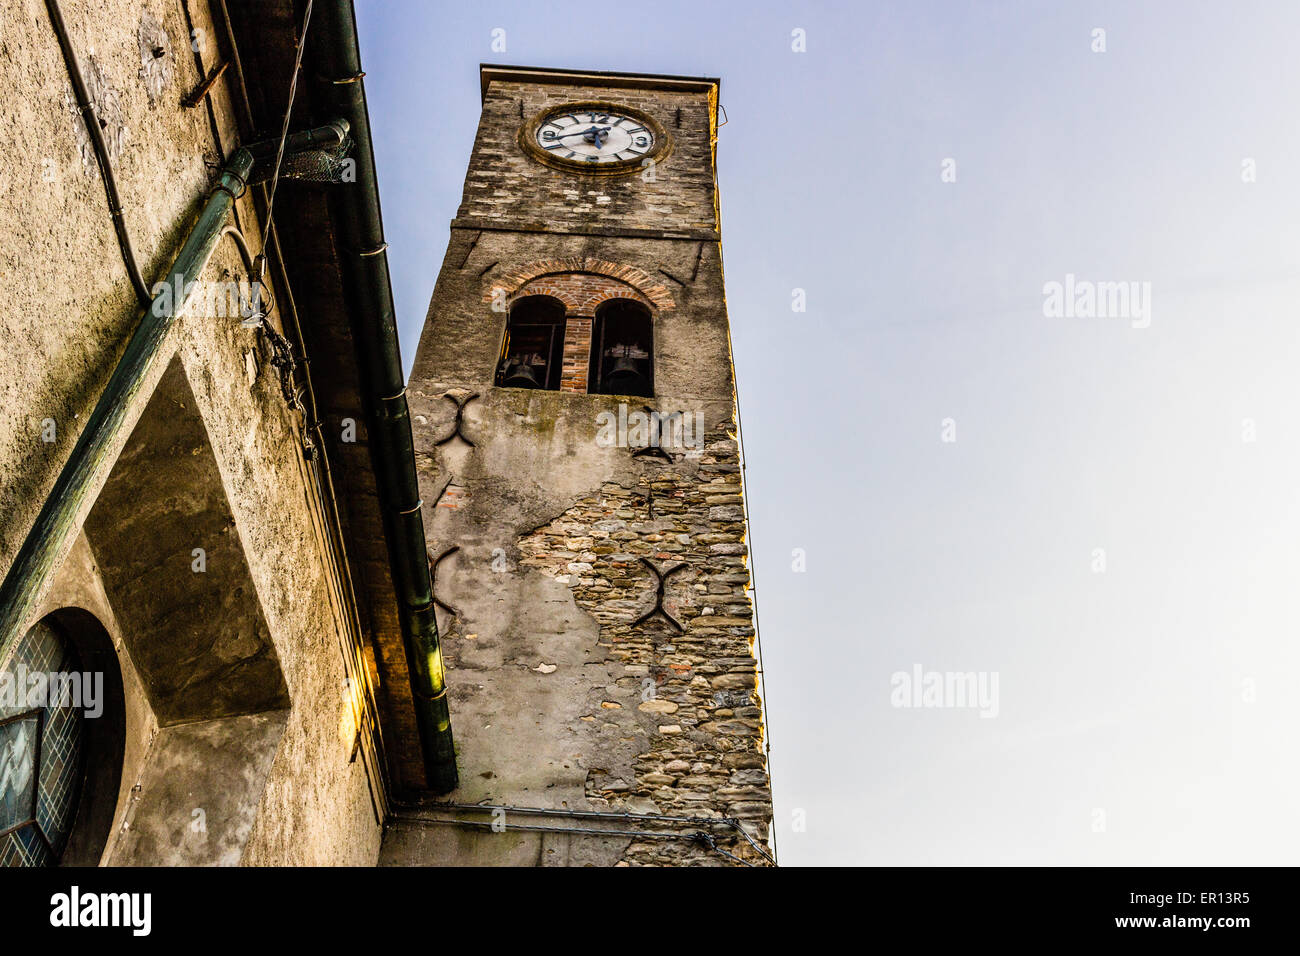 Medieval brickwall steeple of a country church in Emilia Romagna in the Northern Italy countryside. Clock at 17:40 Stock Photo